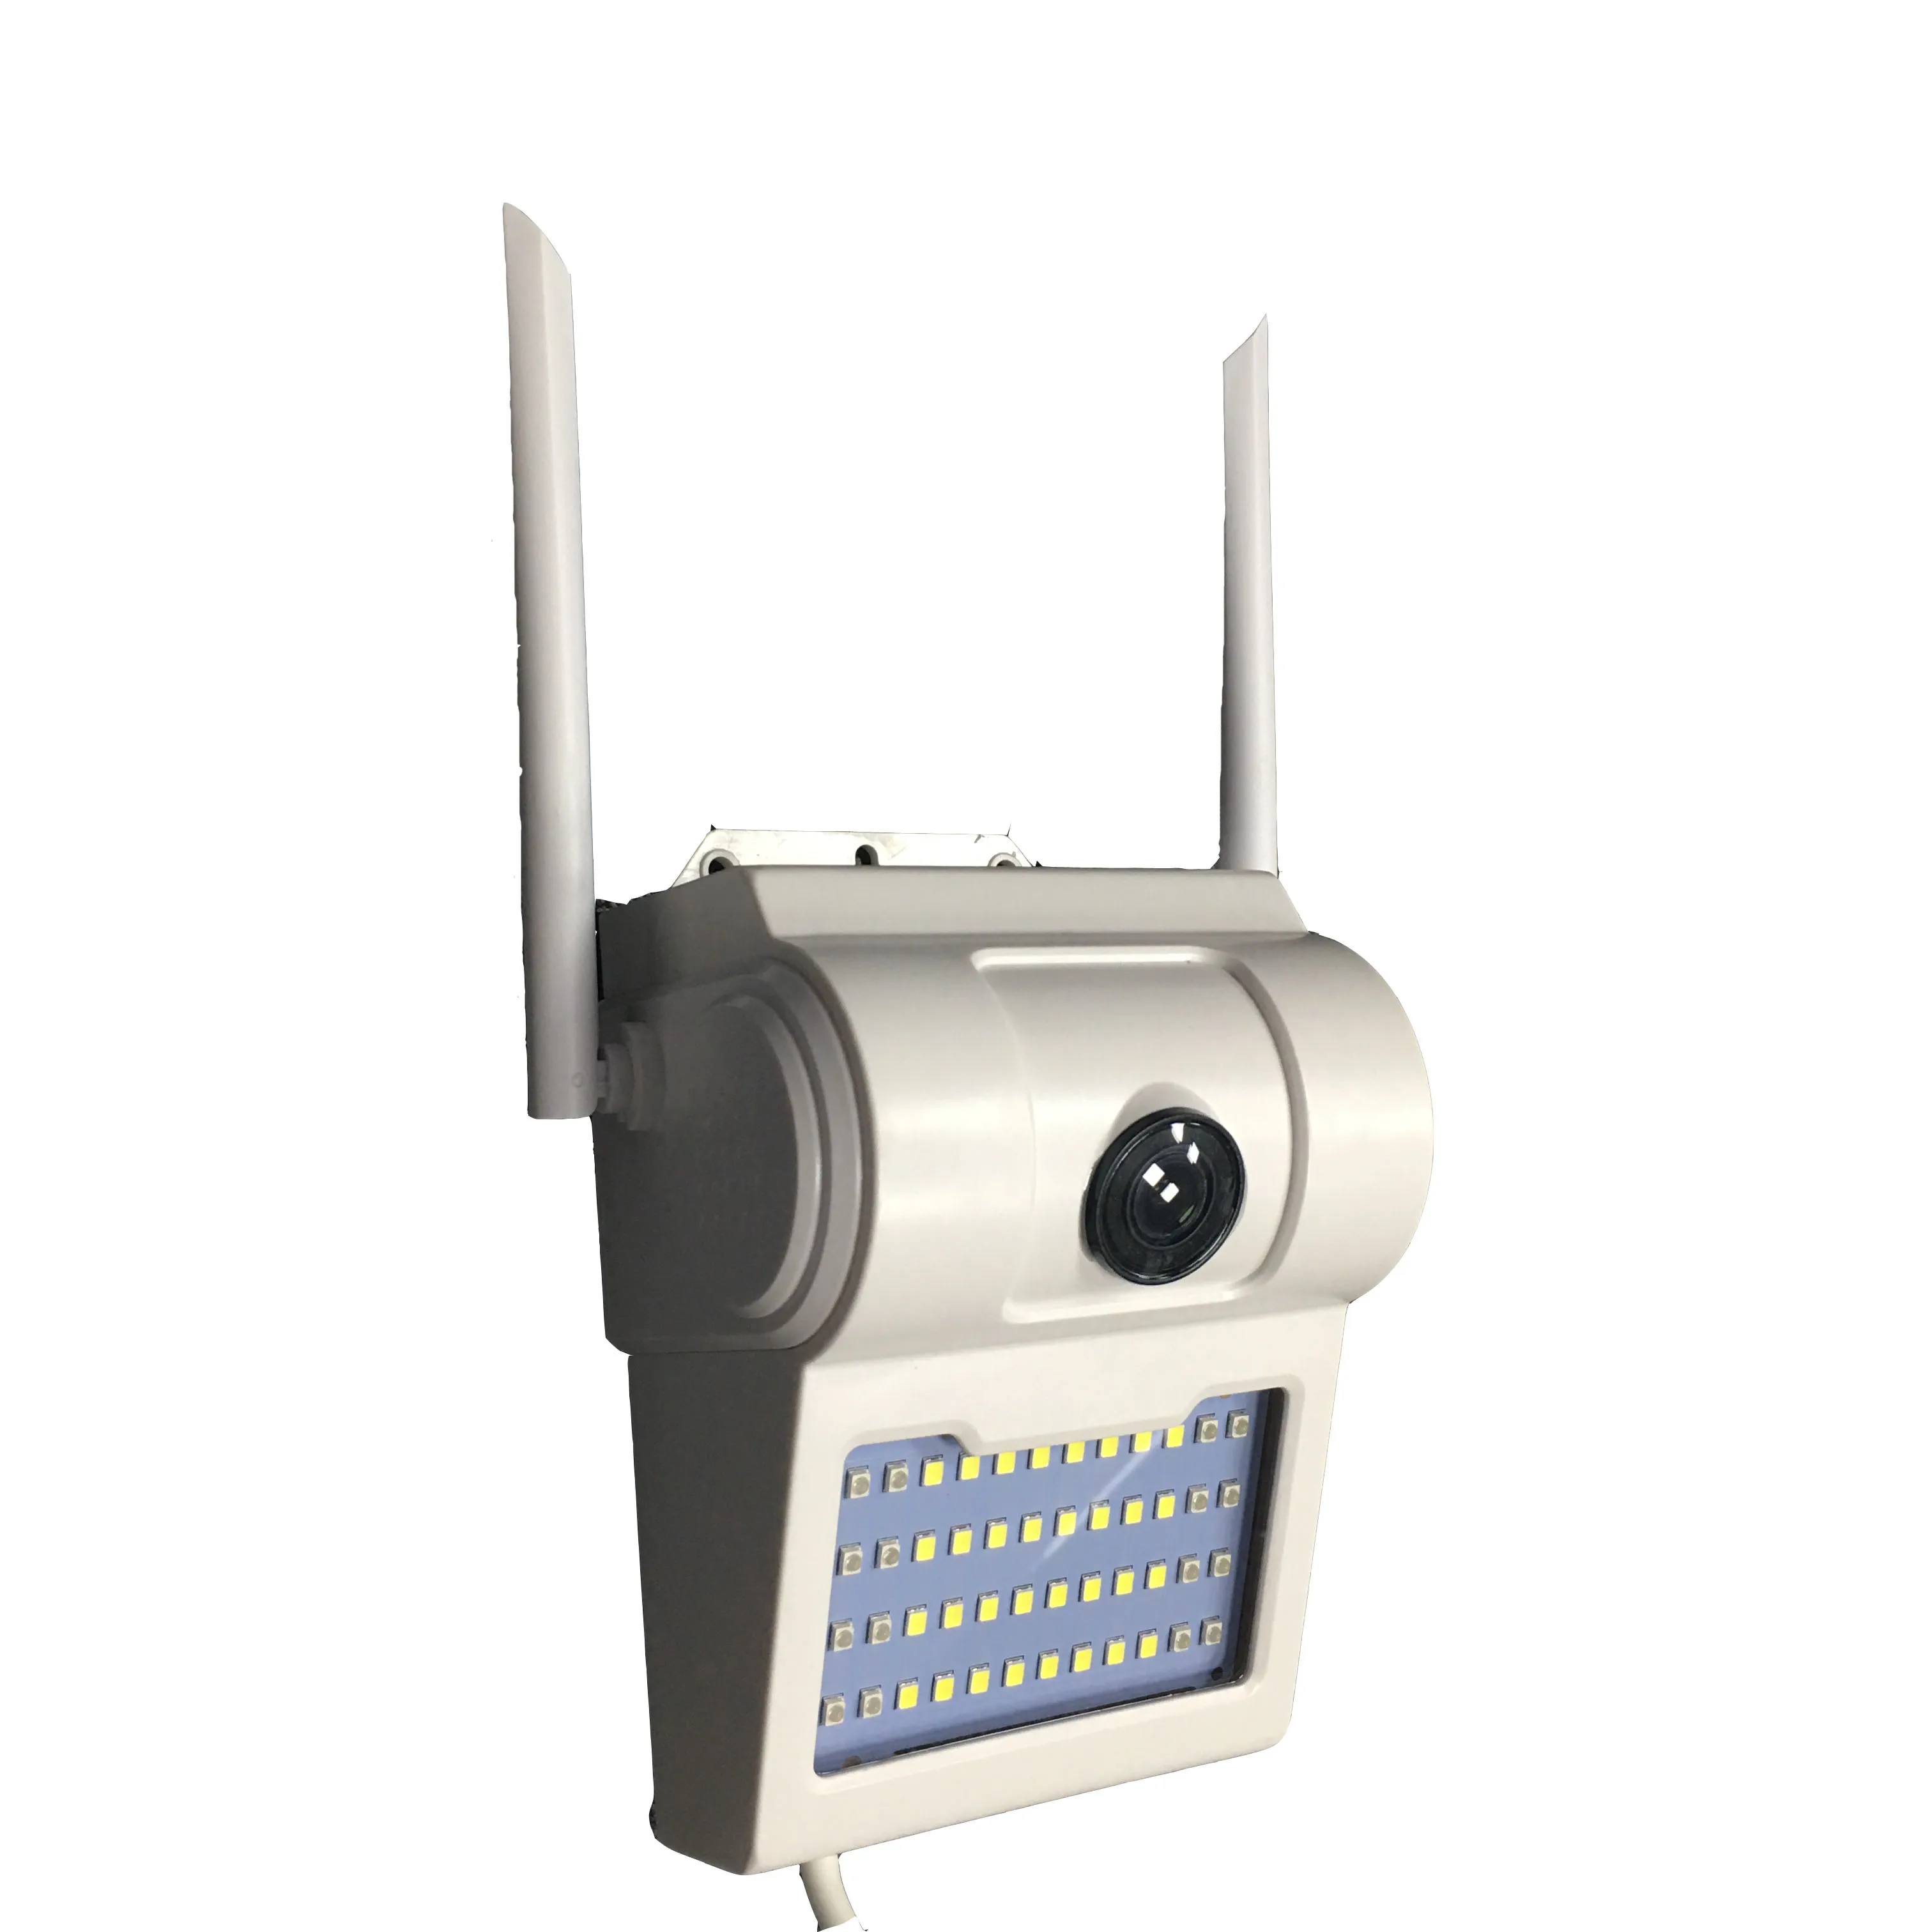 Hot sell Floodlight 2MP WIFI Wireless flood camera motion with PIR Motion outdoor floodlight camera